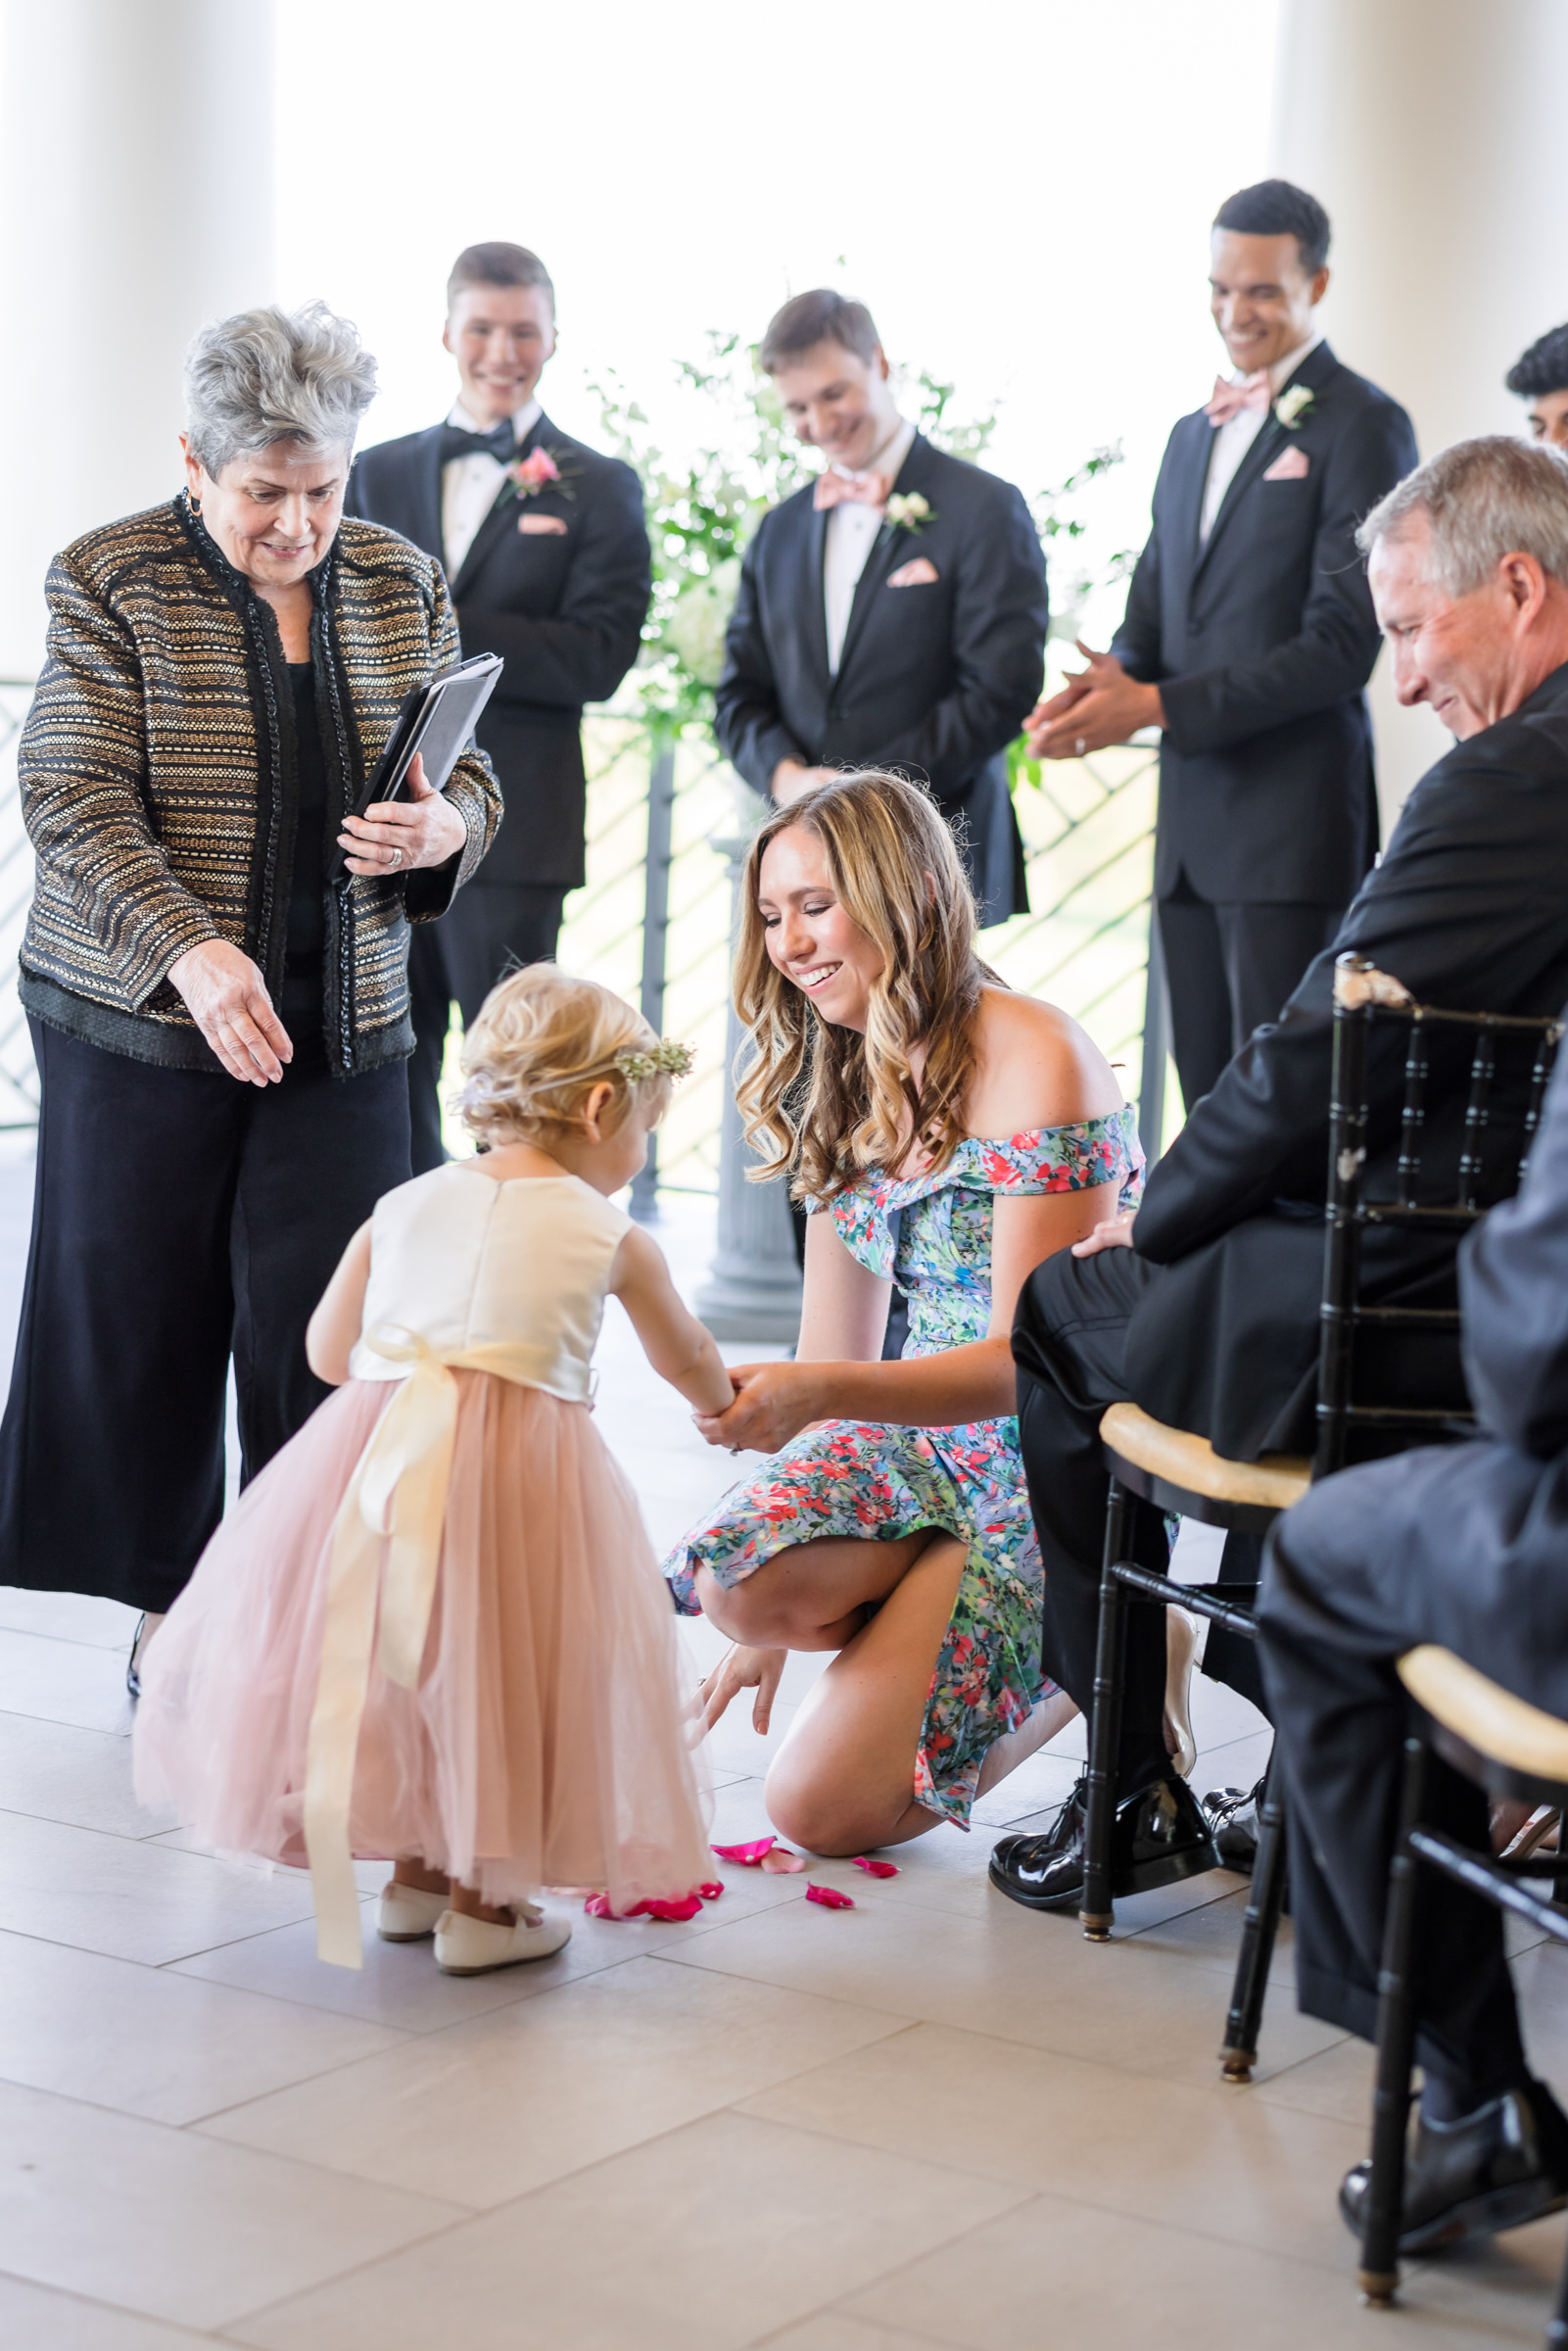 woman helping flower girl throw petals during ceremony